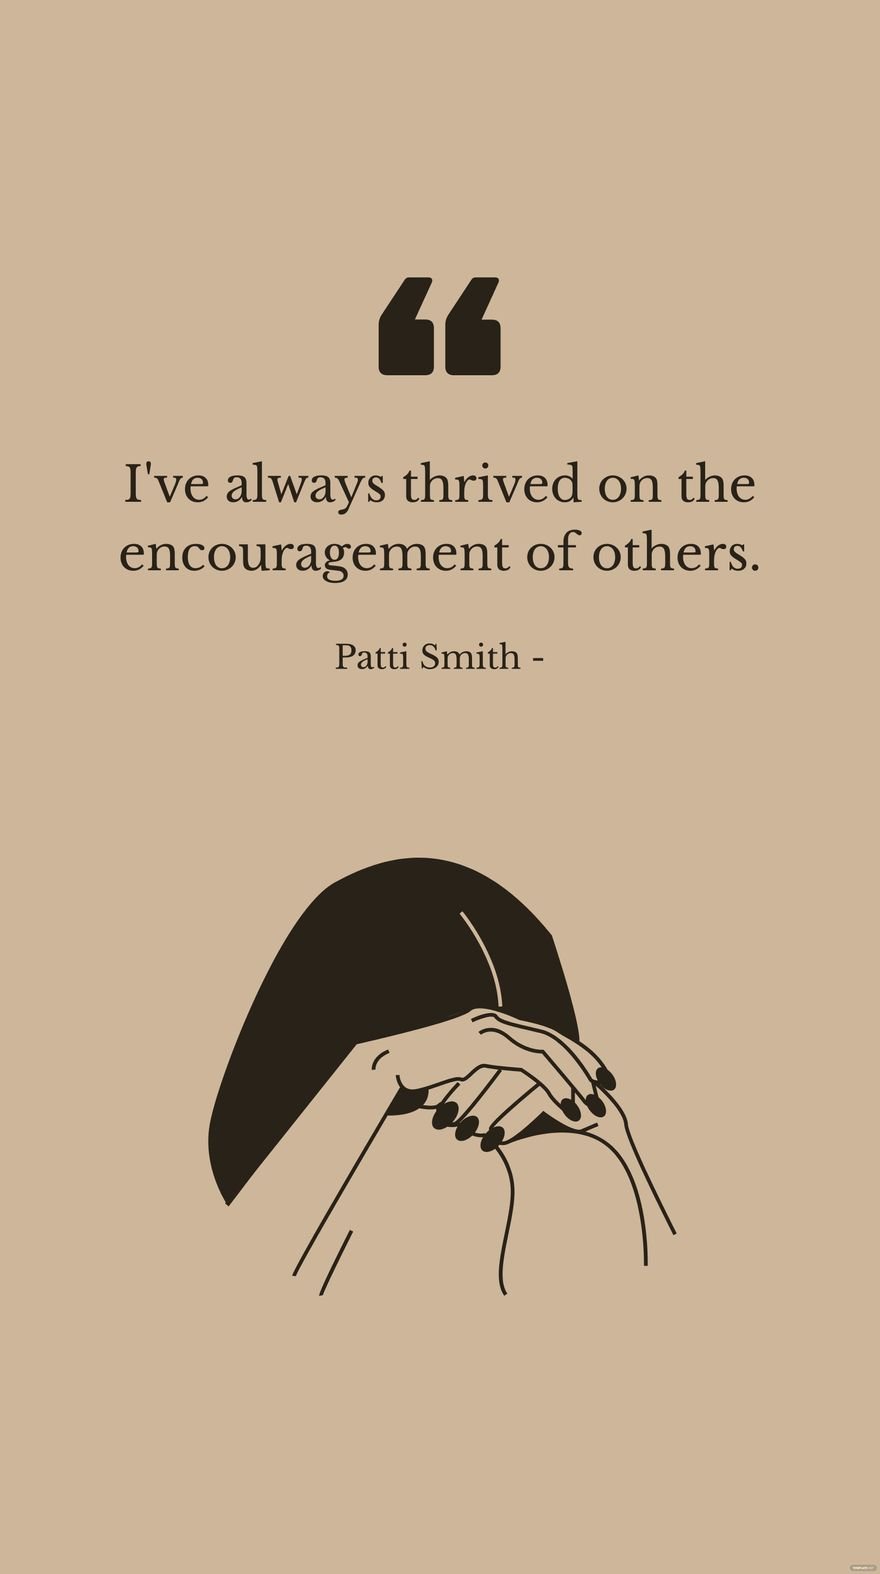 Patti Smith - I've always thrived on the encouragement of others. in JPG